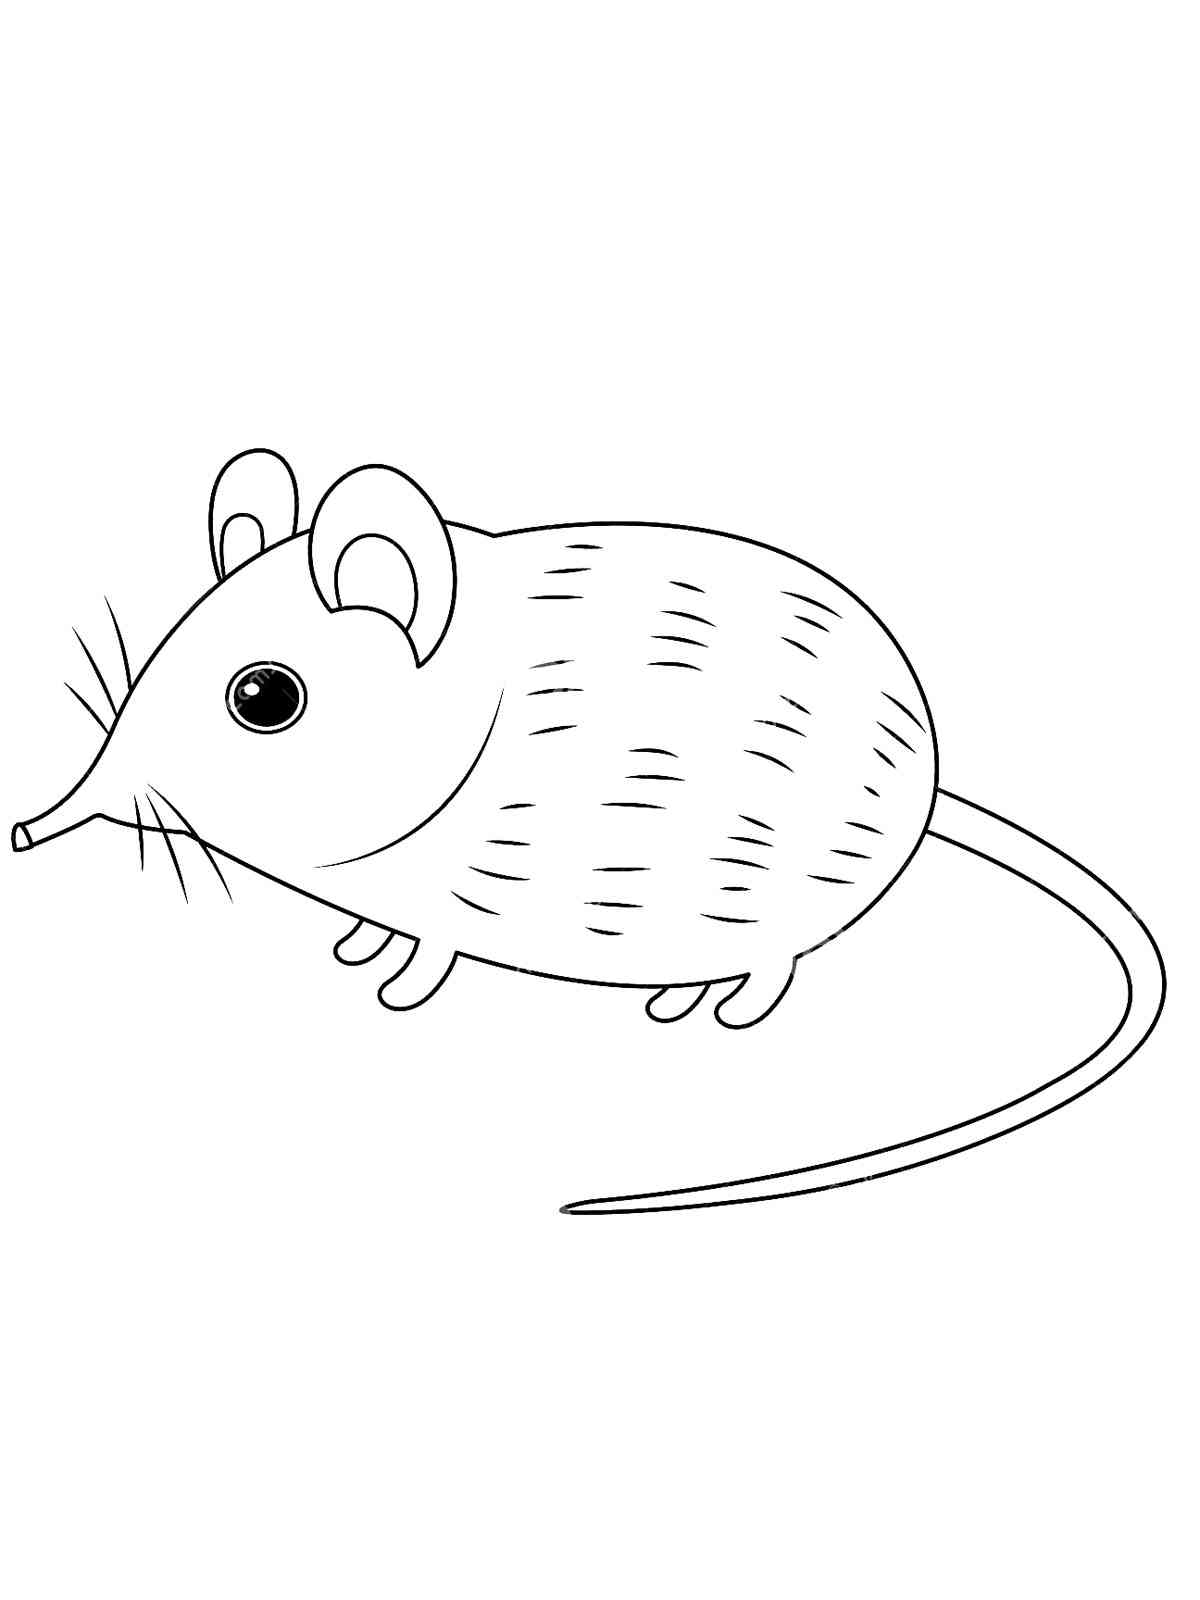 Cute Shrew coloring page